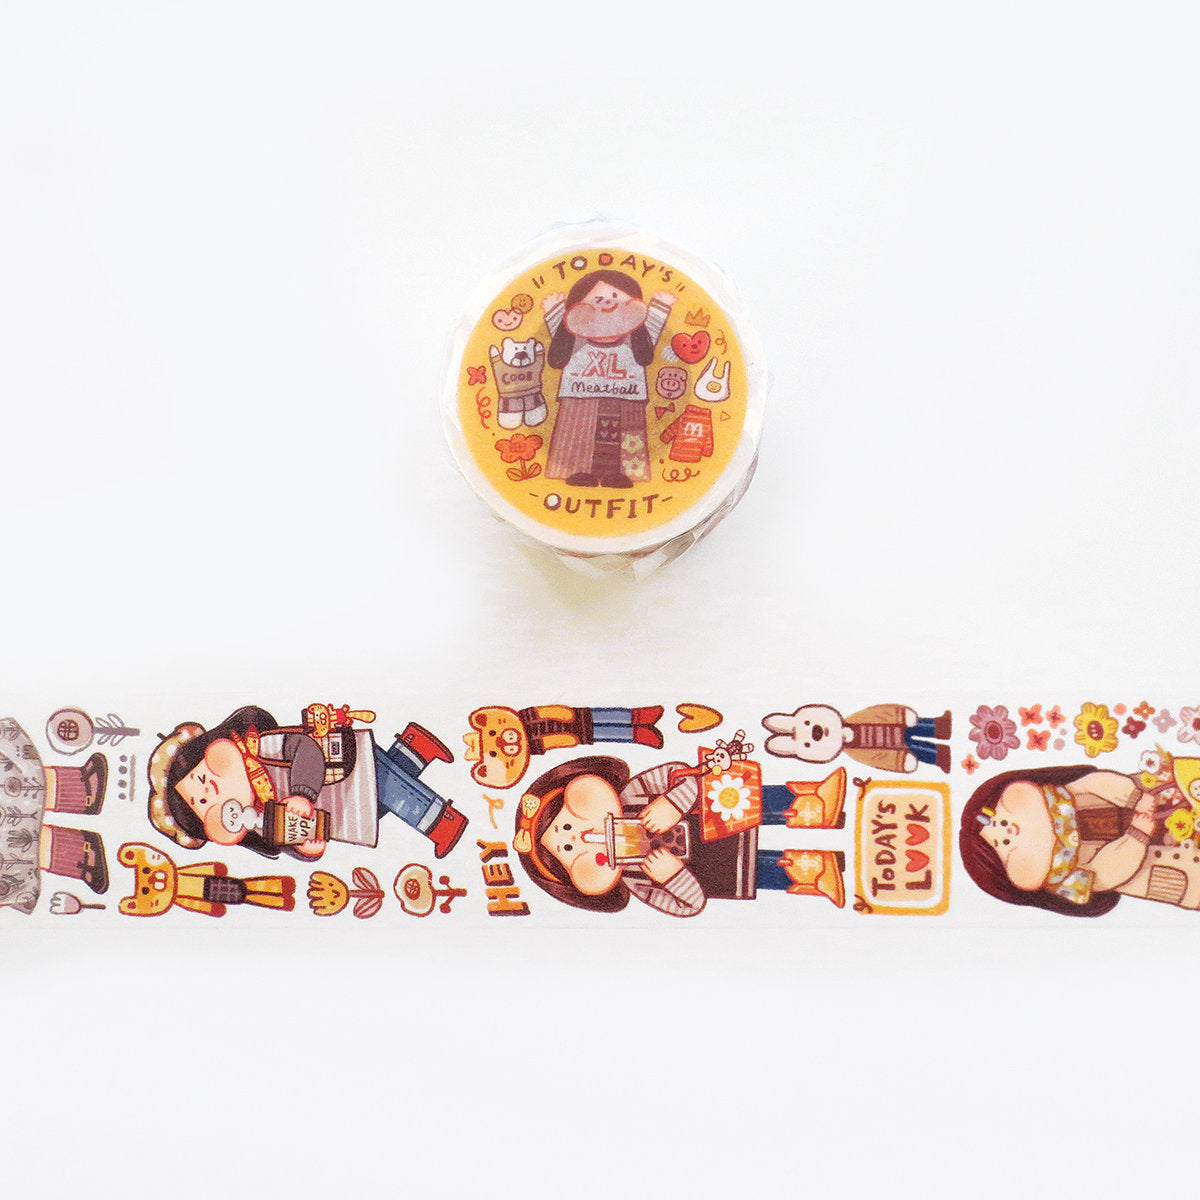 Meatball Washi Tape: Today's Outfit